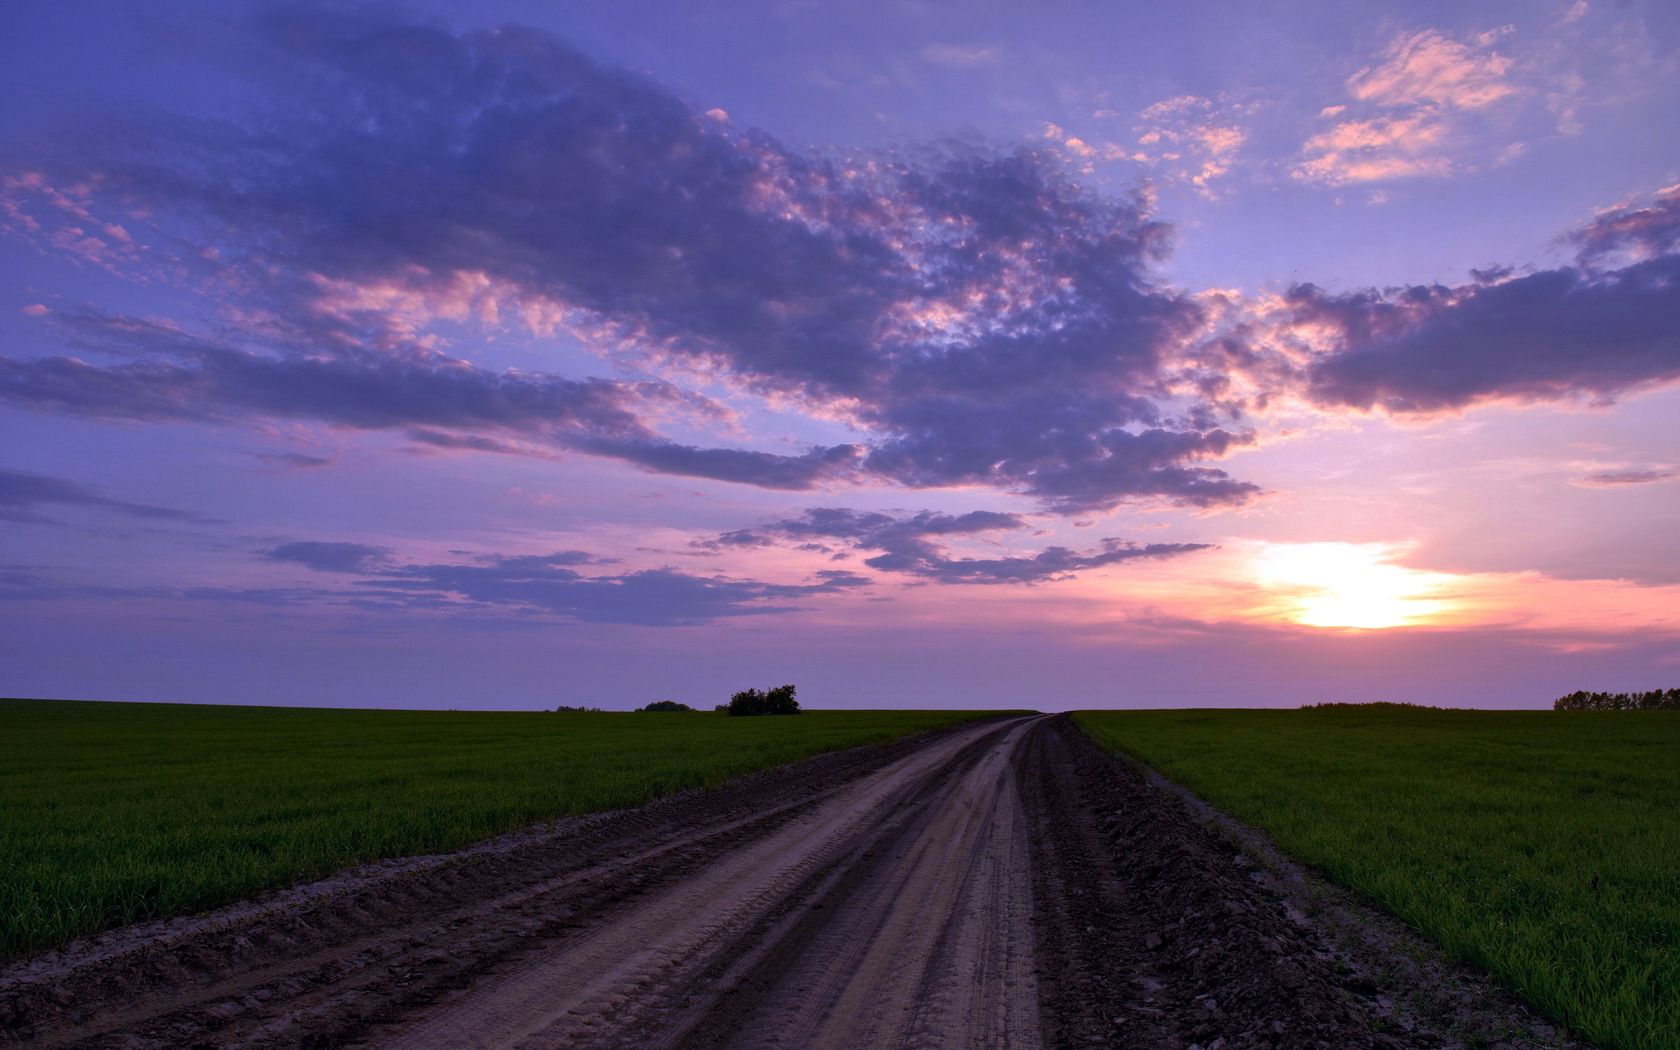 field, country, road, clouds, nature, horizon, evening, countryside